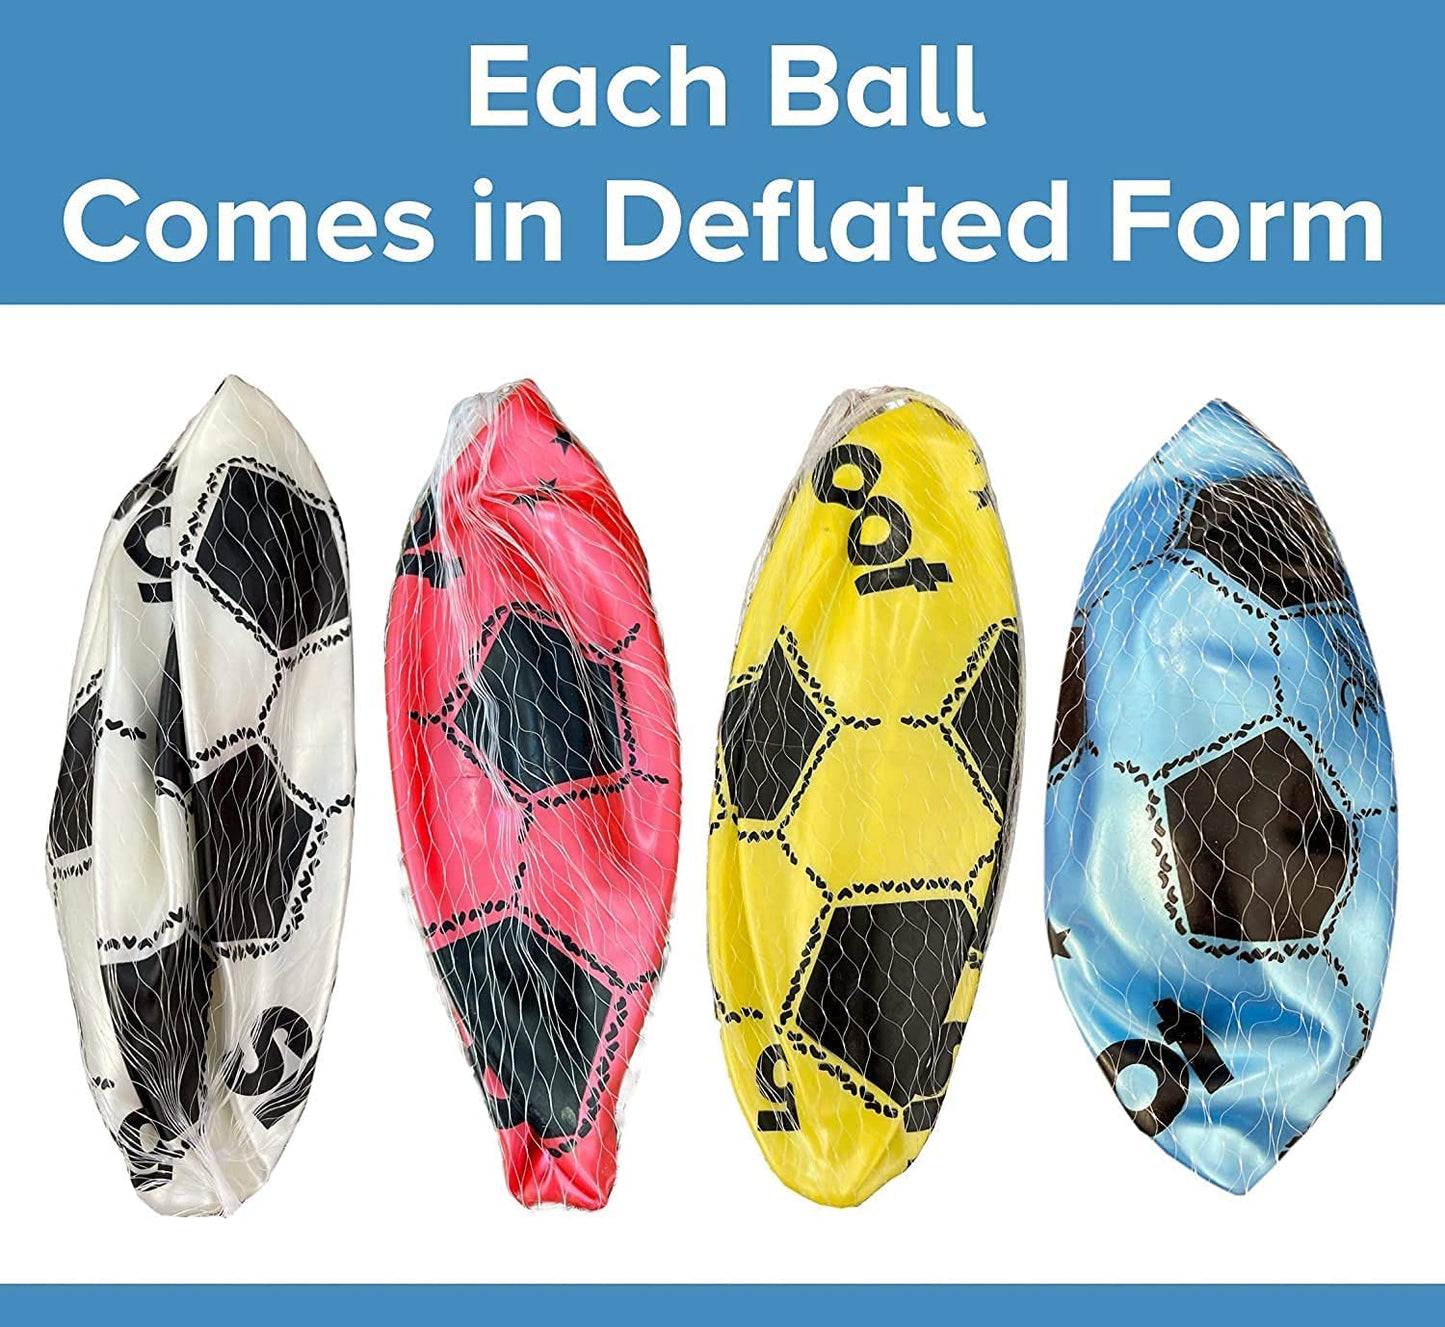 Soccer Shoot PVC Football (Pack of 6) Toy Ball for Kids (Deflated) Lightweight Adjustable Inflatable for Indoor Outdoor Play Beach, Home, Birthday, School & Parties Assorted Colors